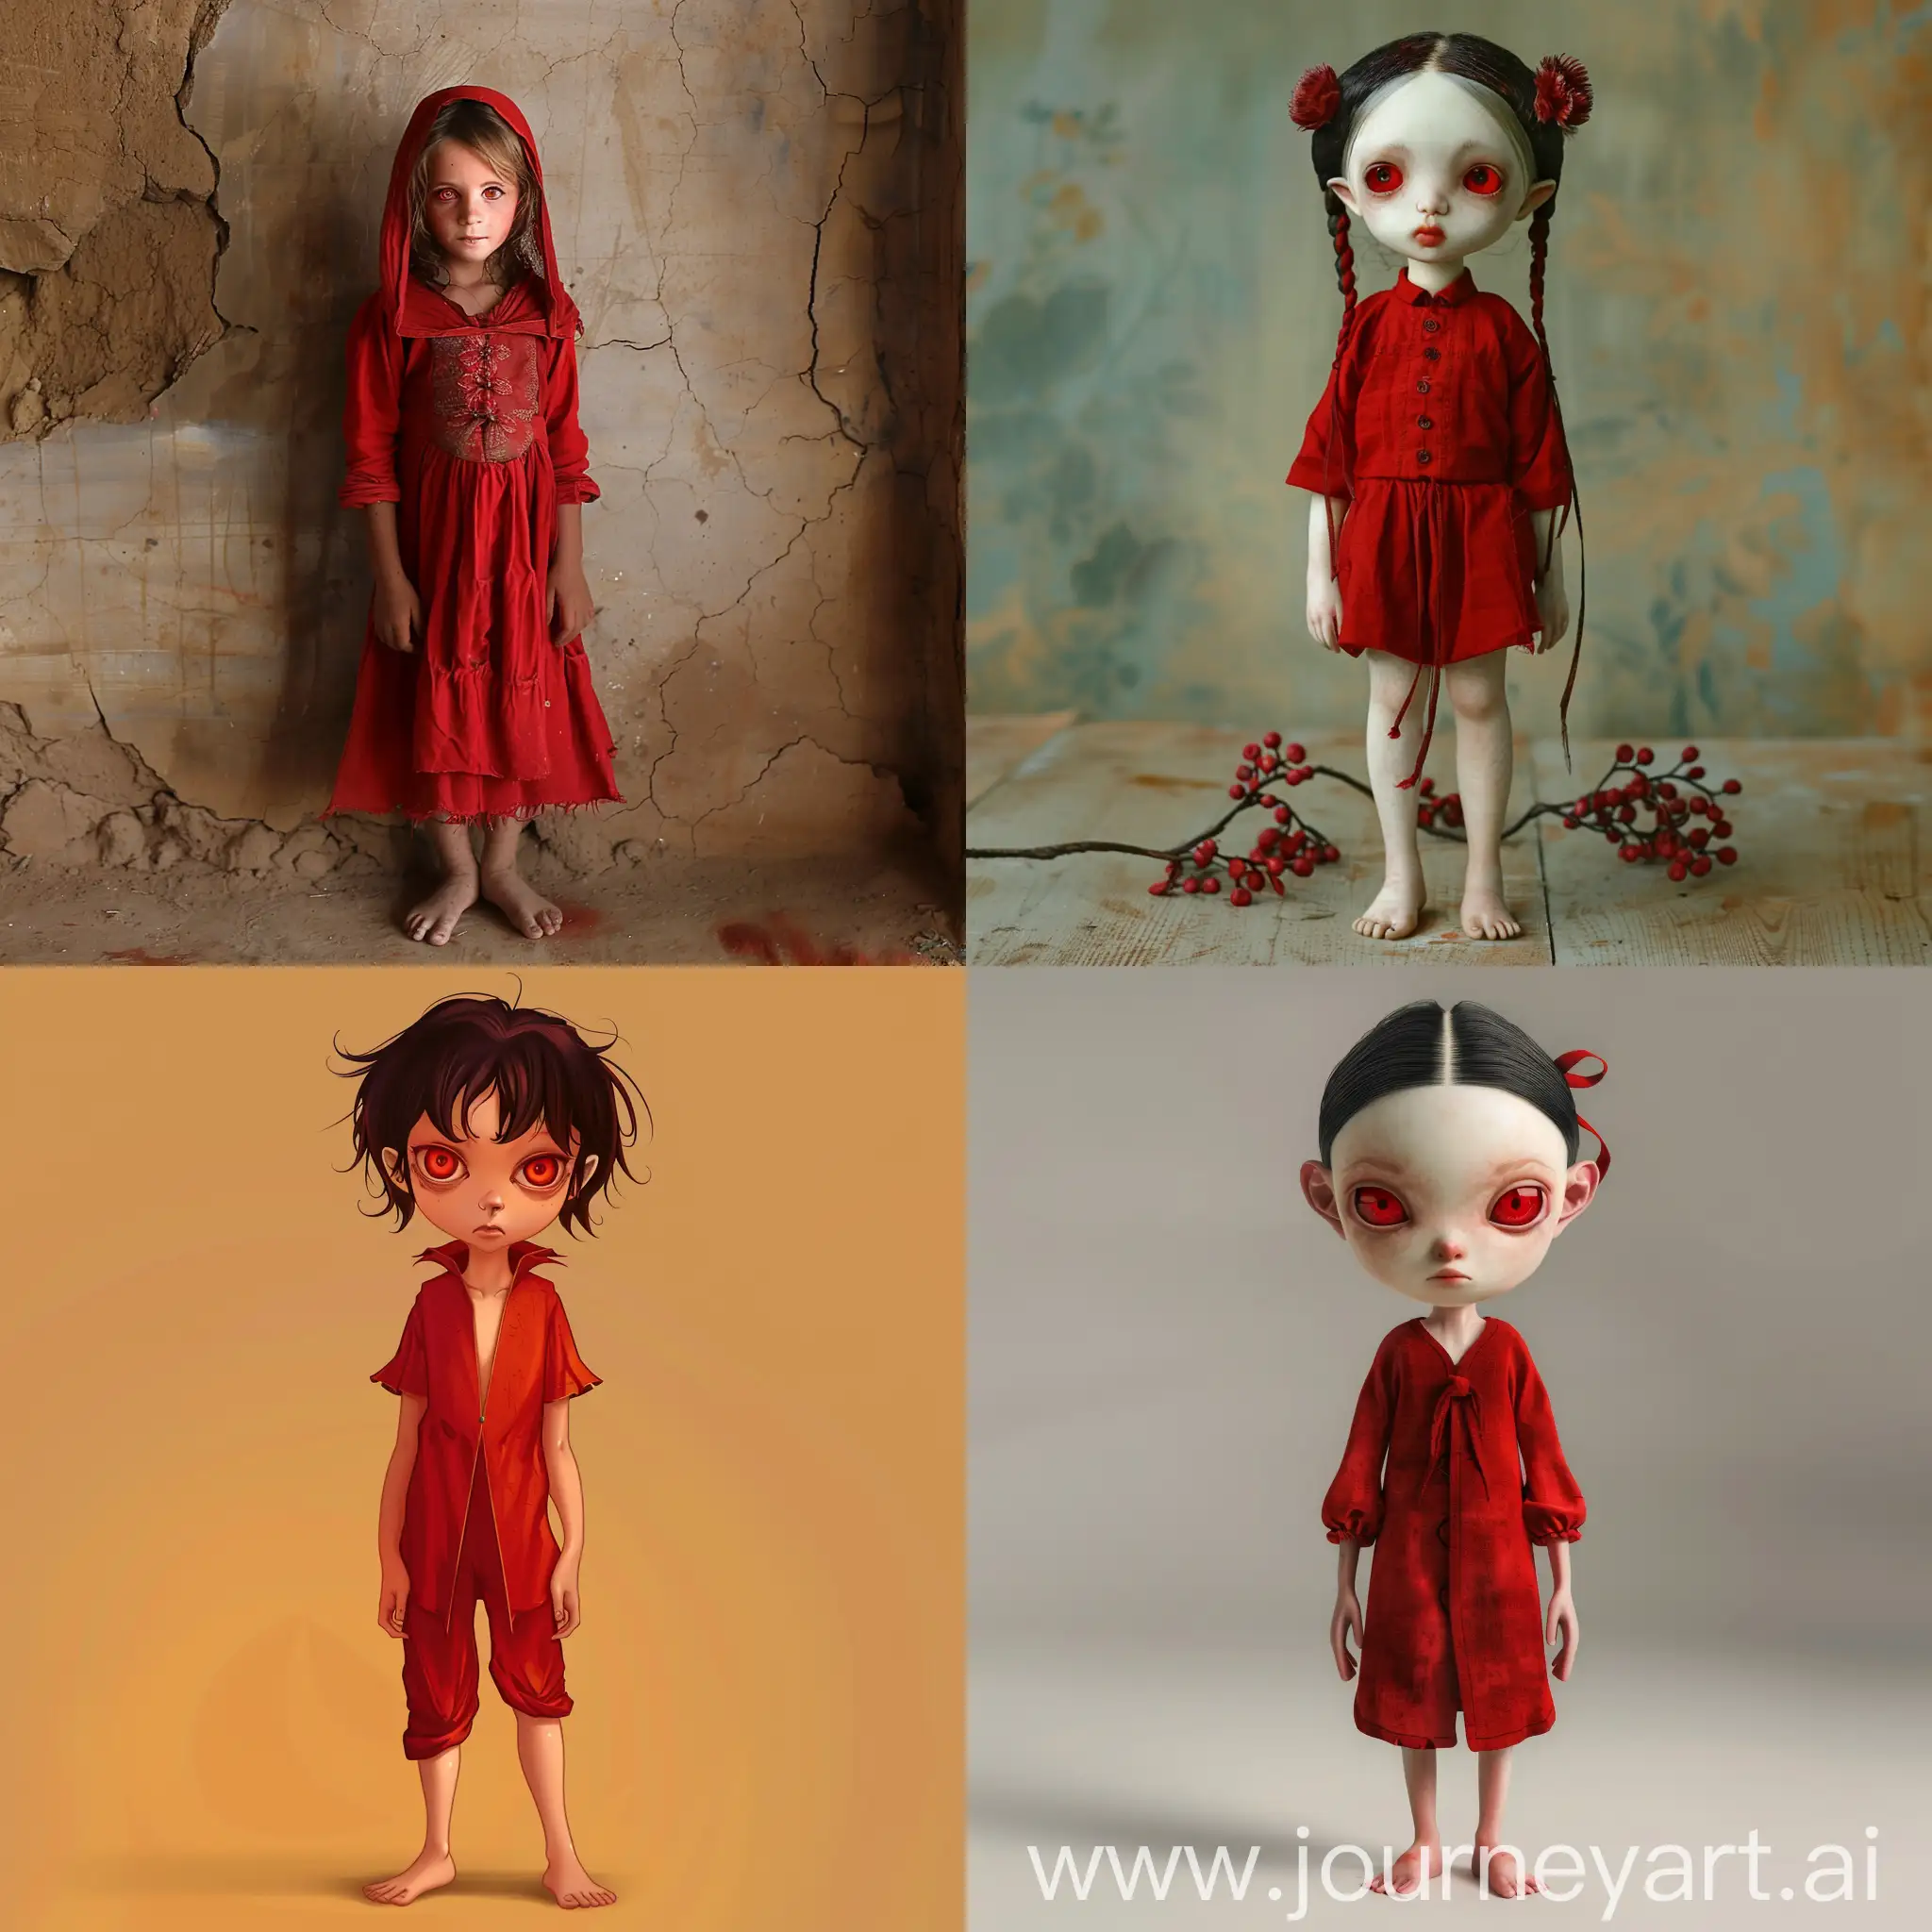 RedEyed-Girl-in-Red-Clothes-One-Meter-Five-Tall-Barefoot